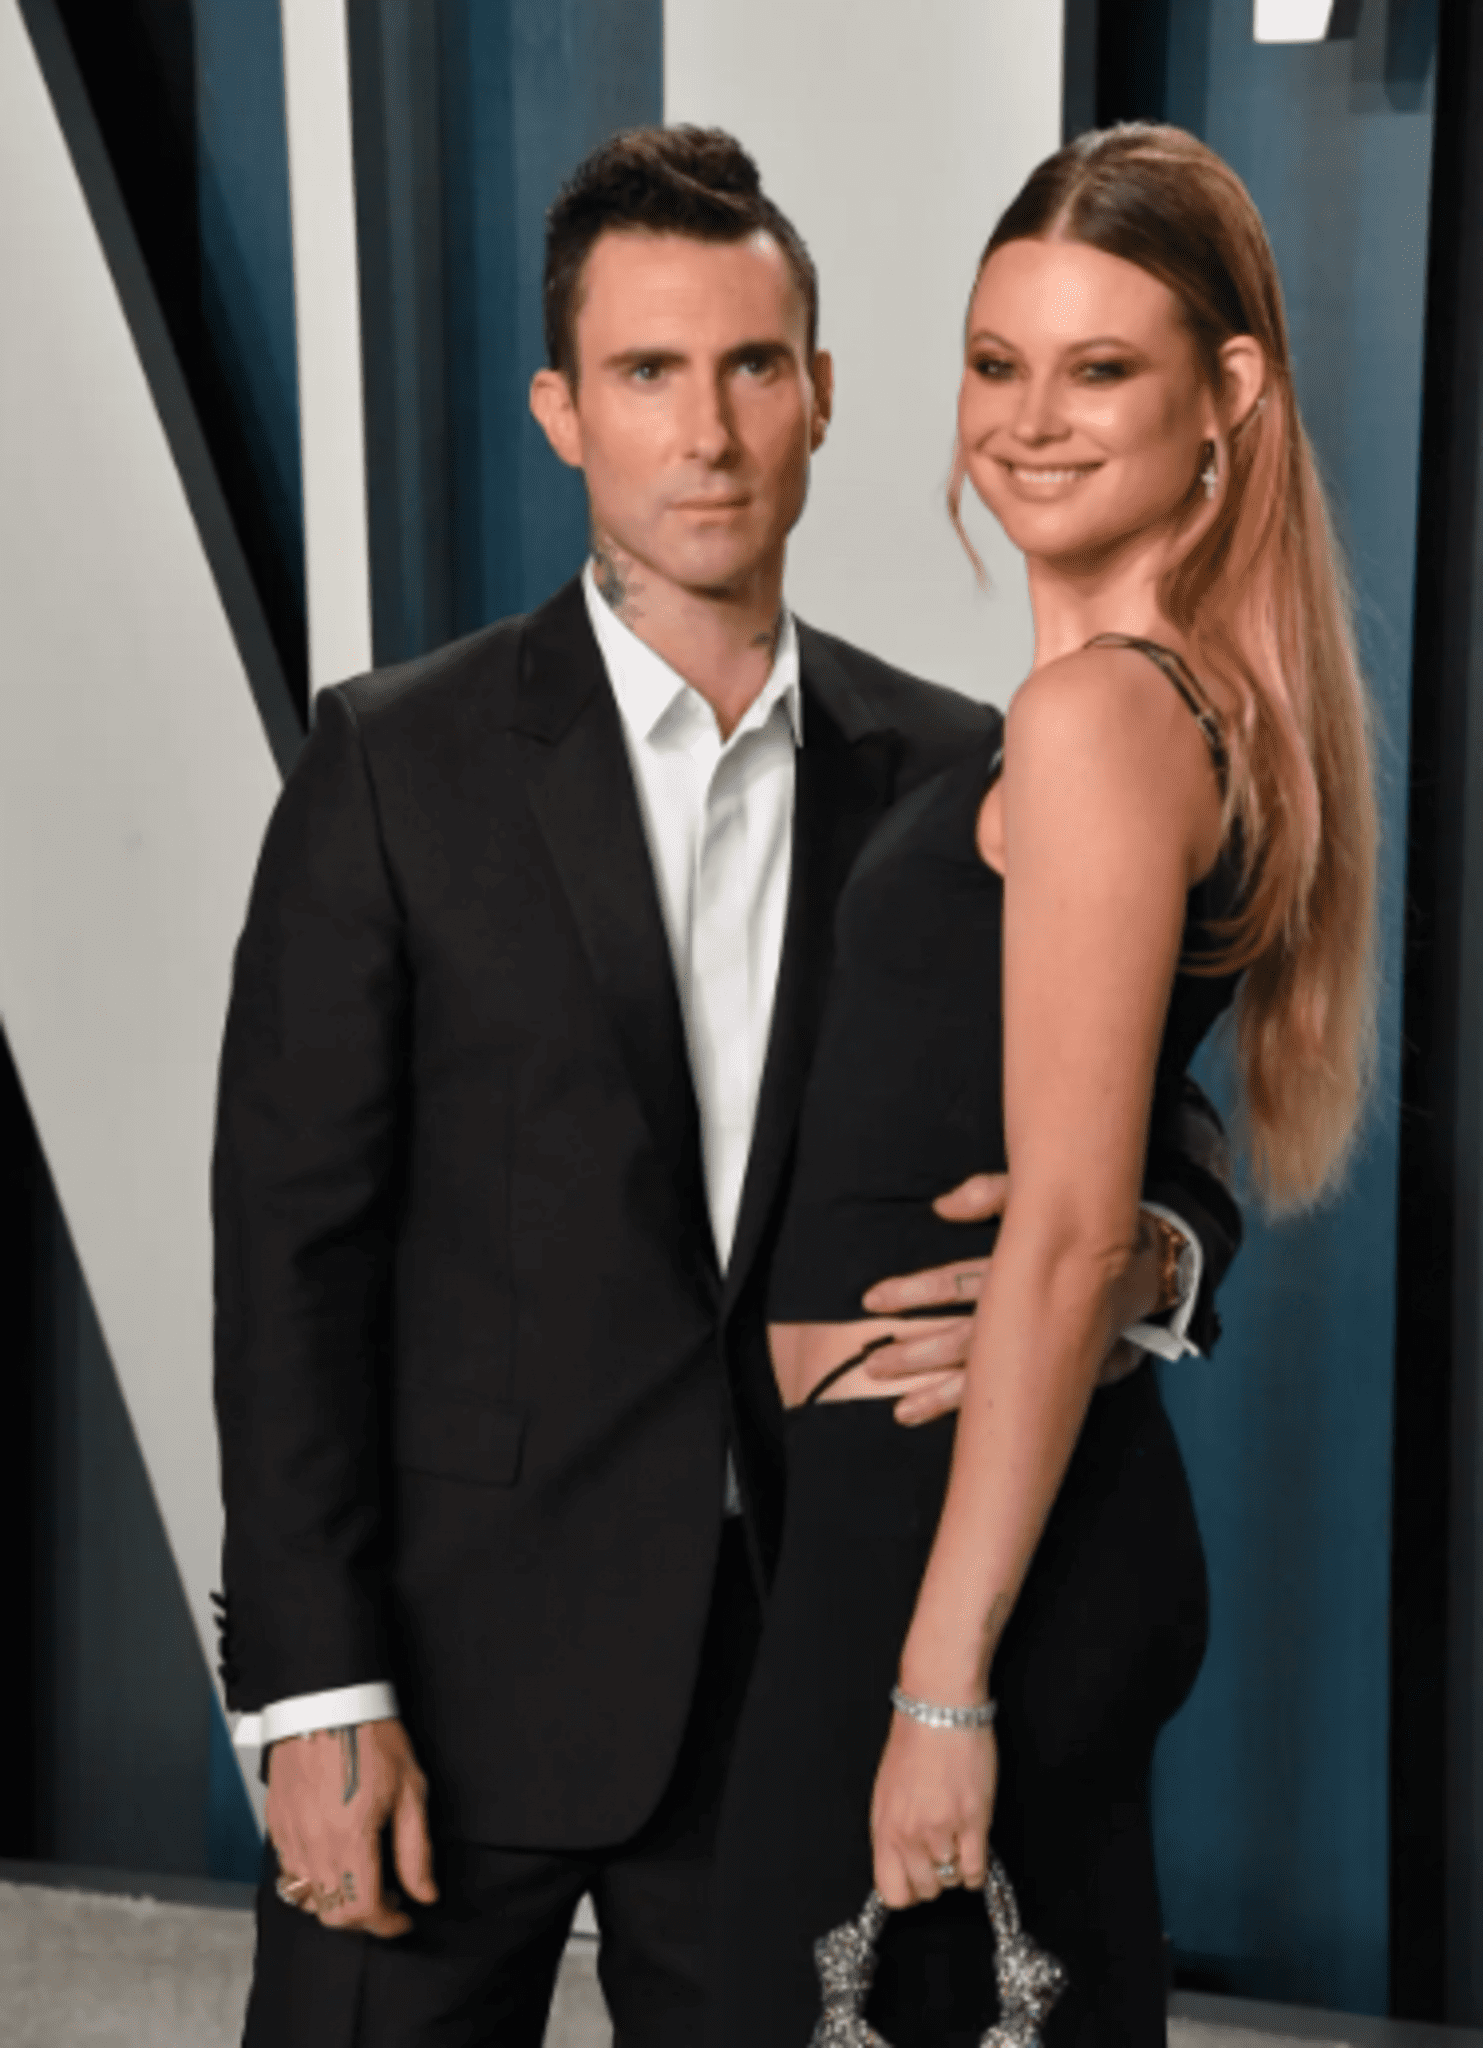 Adam Levine and Maroon 5 were performing for the first time since many women accused him of sexual misconduct, and Behati Prinsloo was spotted backstage.